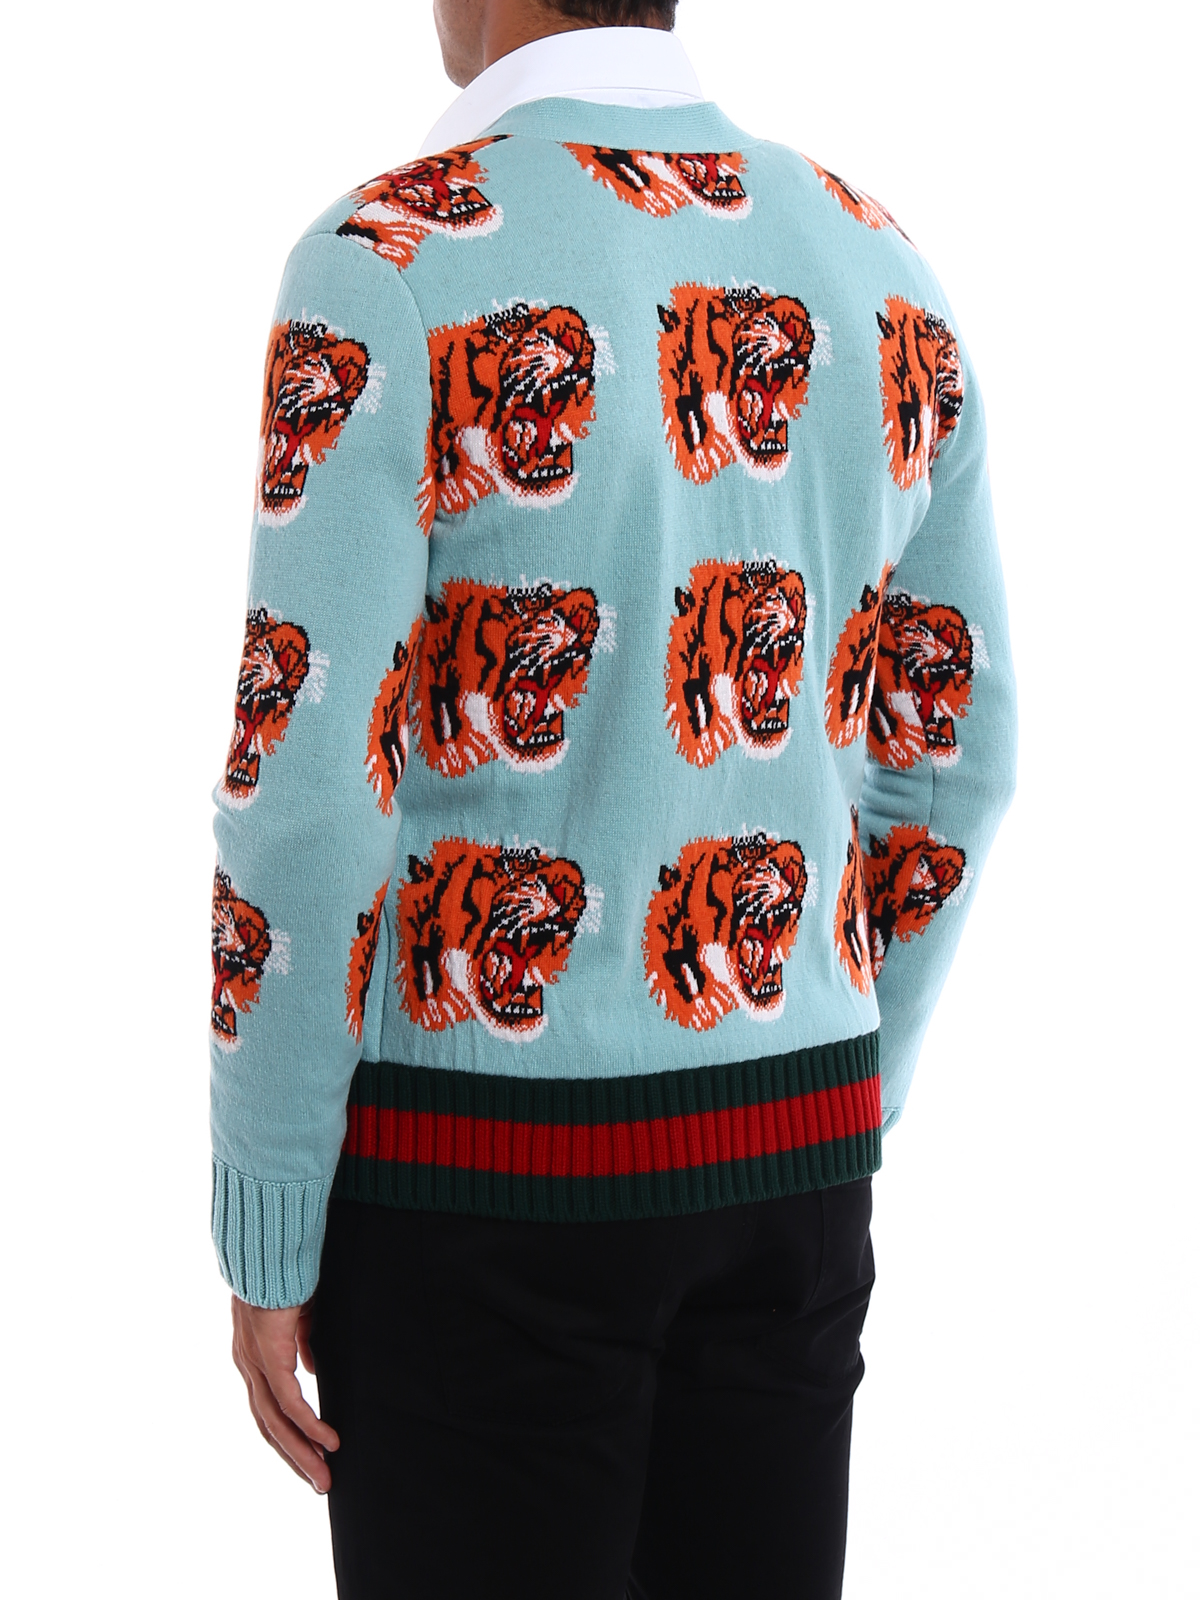 gucci wool sweater with tiger